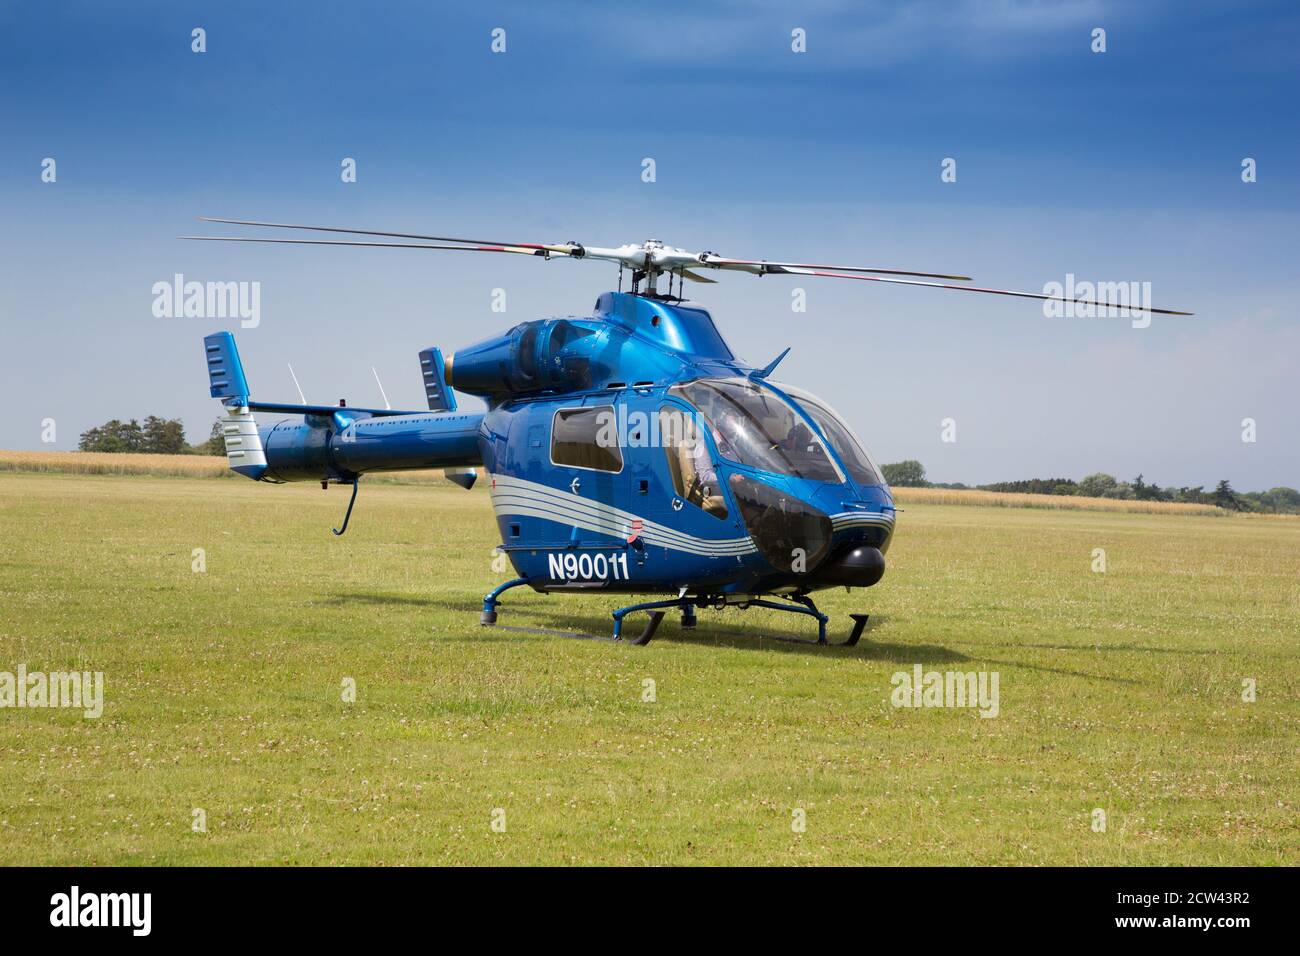 MD-900 helicopter parked on airfield Stock Photo